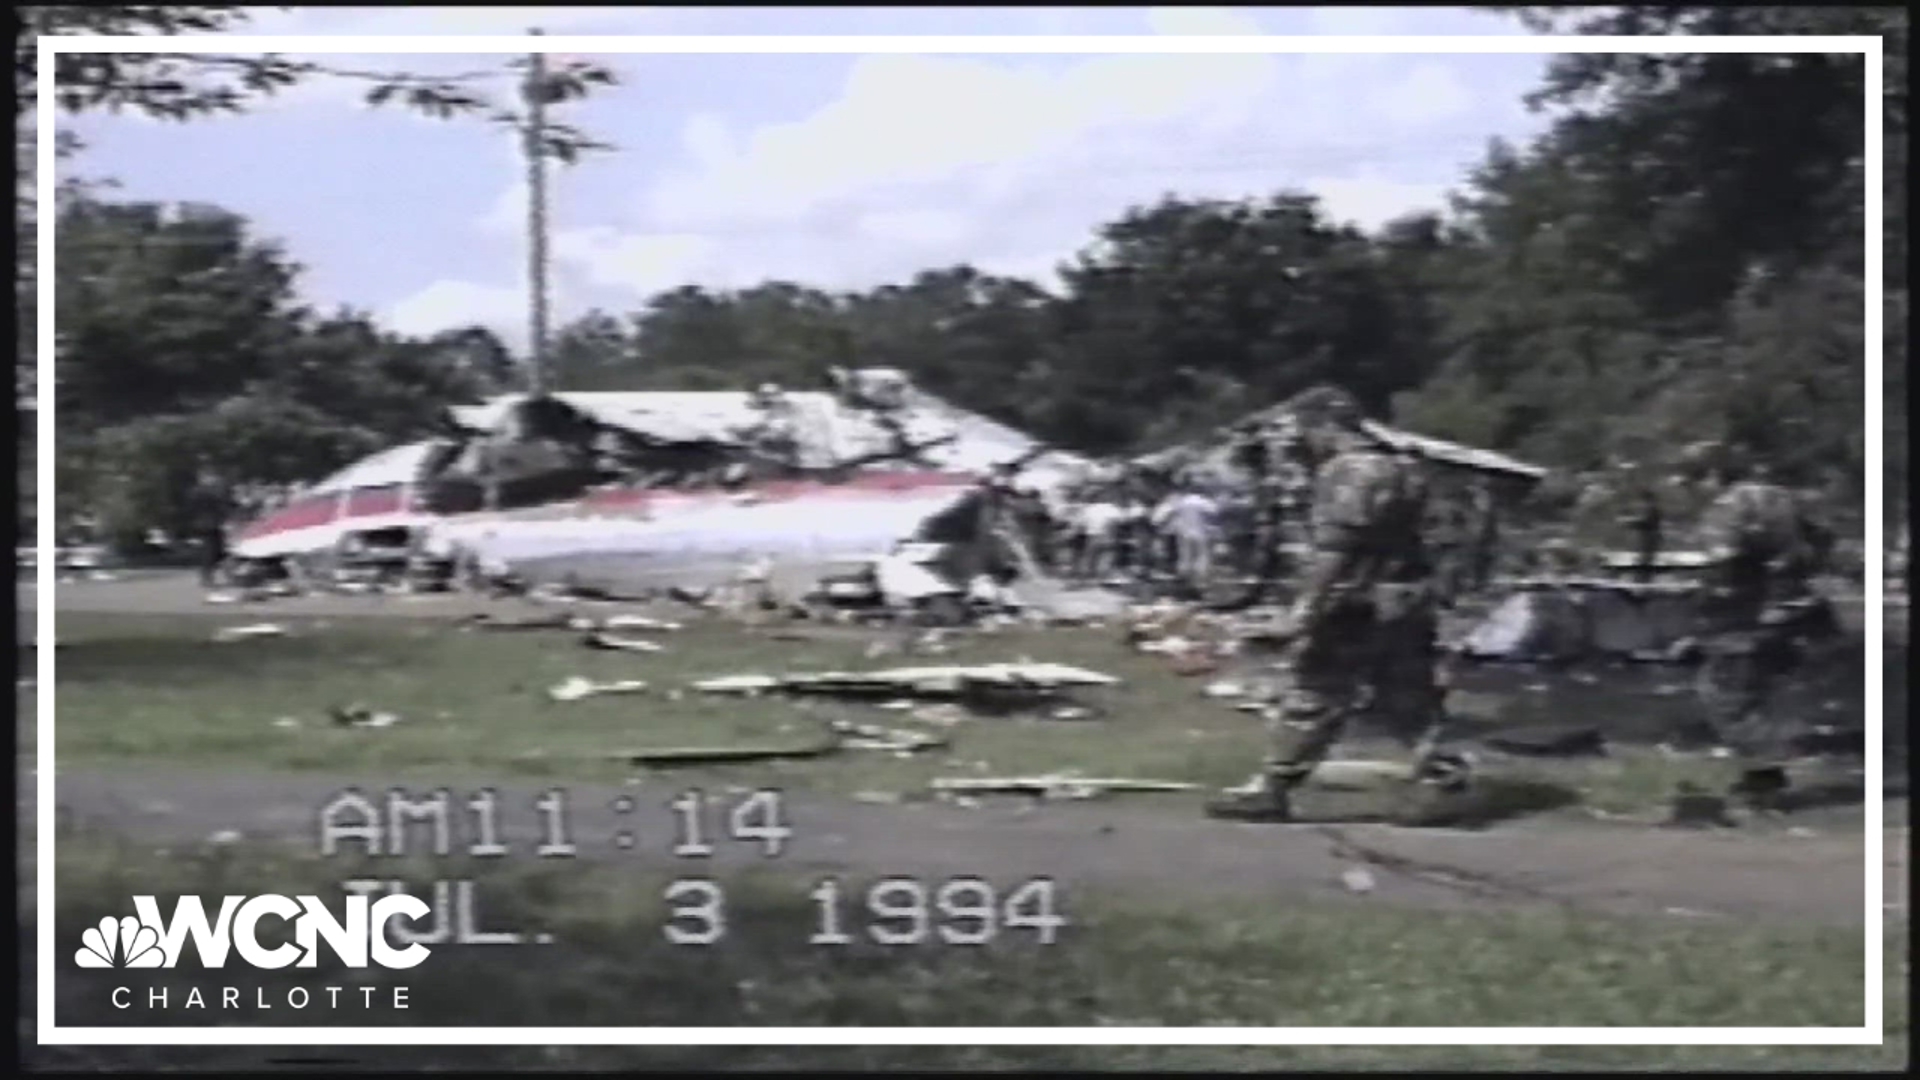 Just before 7 p.m. on July 2, 1994, 37 people were killed when a plane crashed into a neighborhood near Charlotte Douglas International Airport.